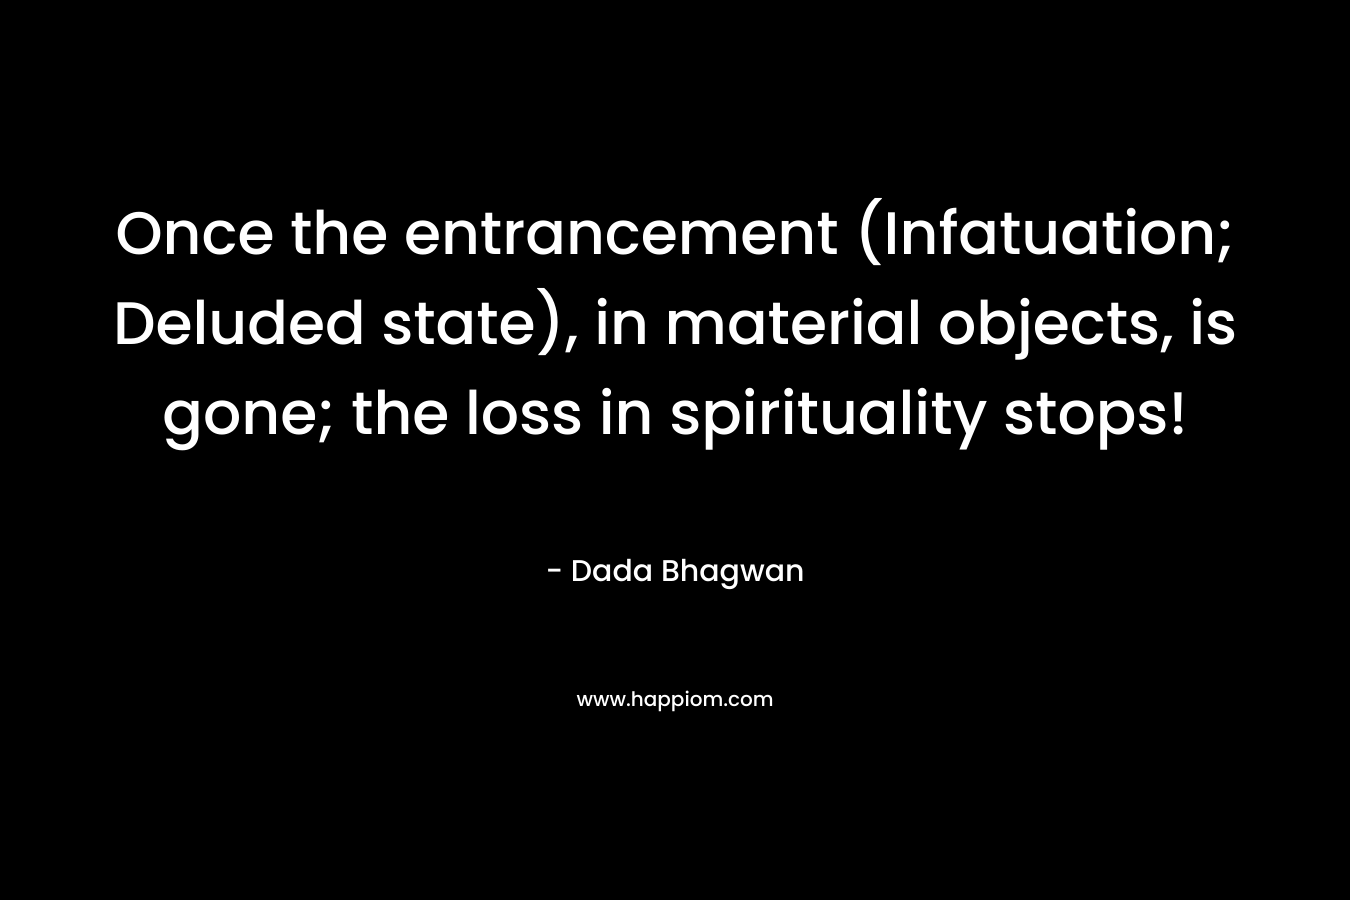 Once the entrancement (Infatuation; Deluded state), in material objects, is gone; the loss in spirituality stops! – Dada Bhagwan